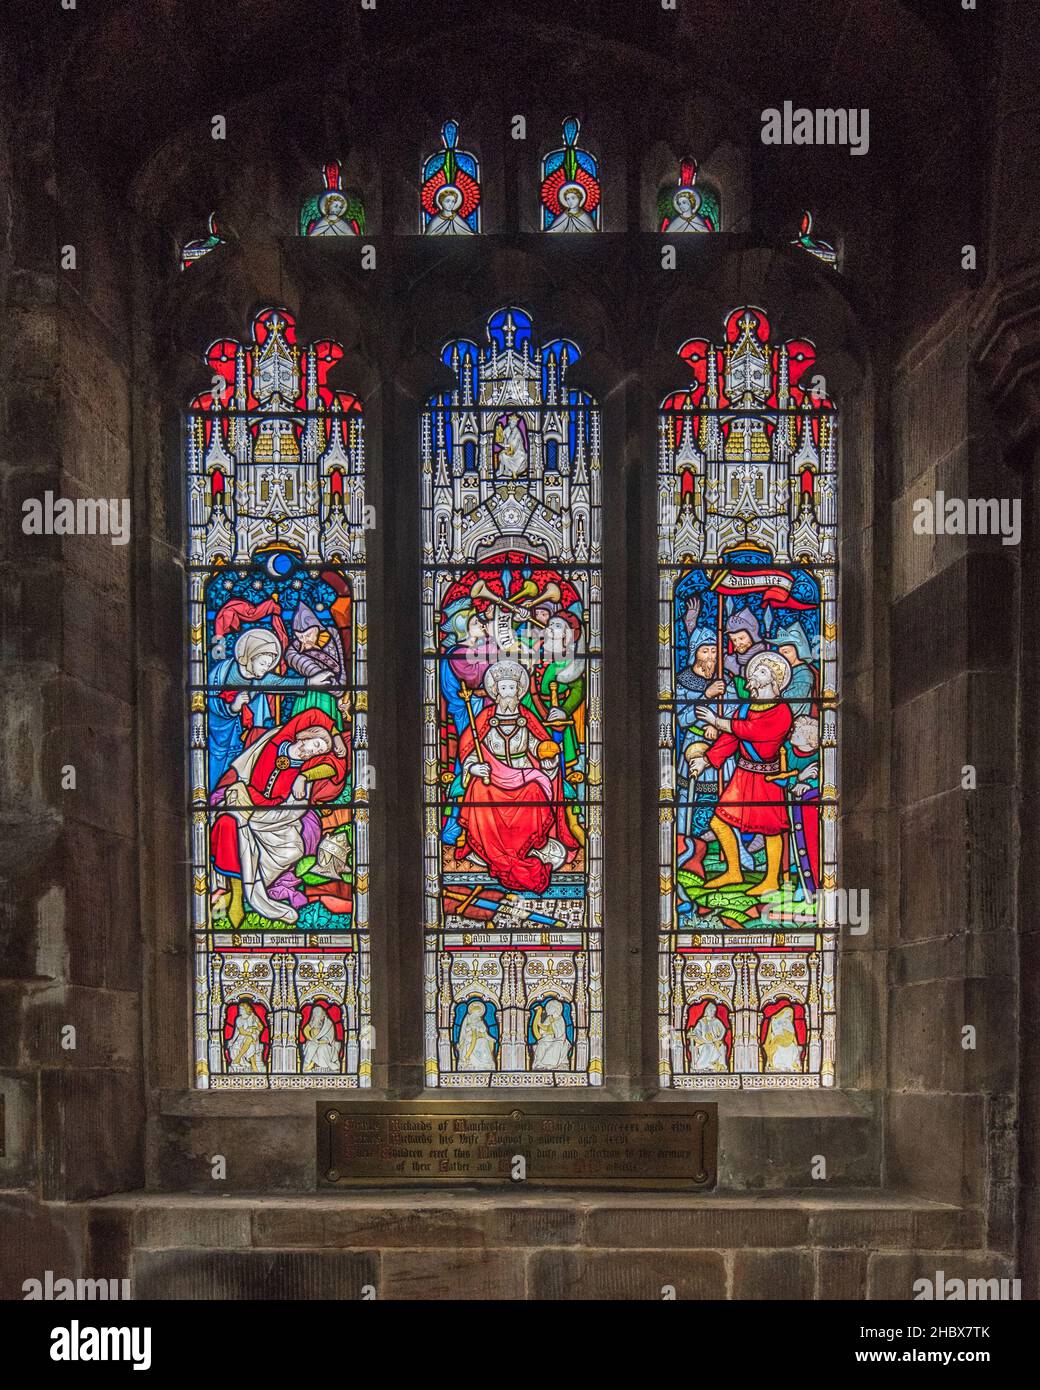 The church of St Marys, Sandbach features many beautiful stained glass windows. Stock Photo